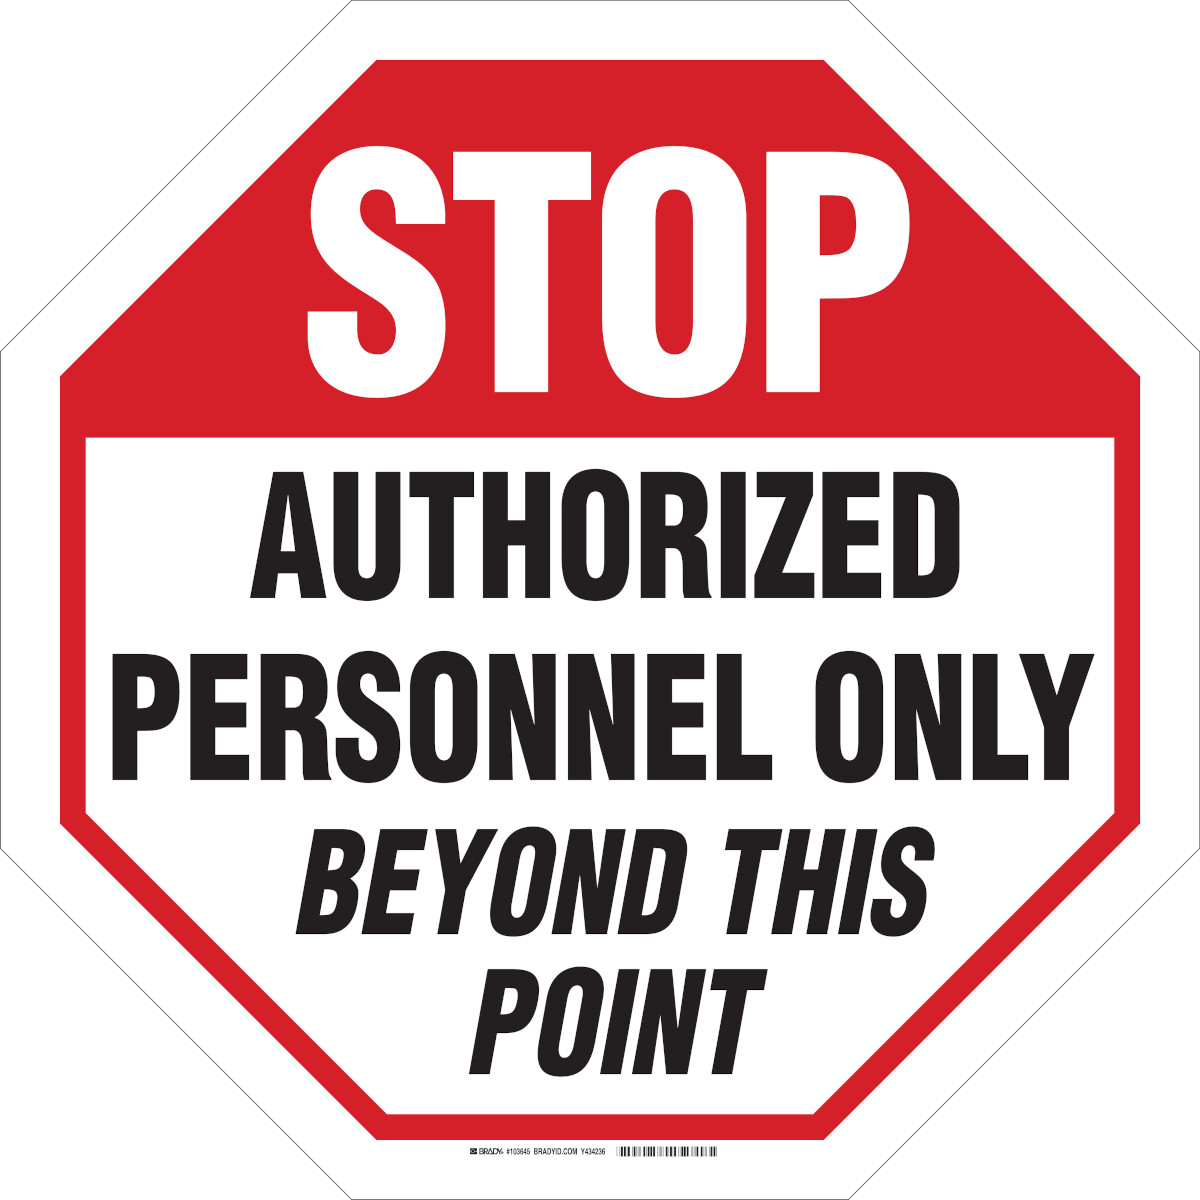 authorized-personnel-only-beyond-this-point-printable-printable-word